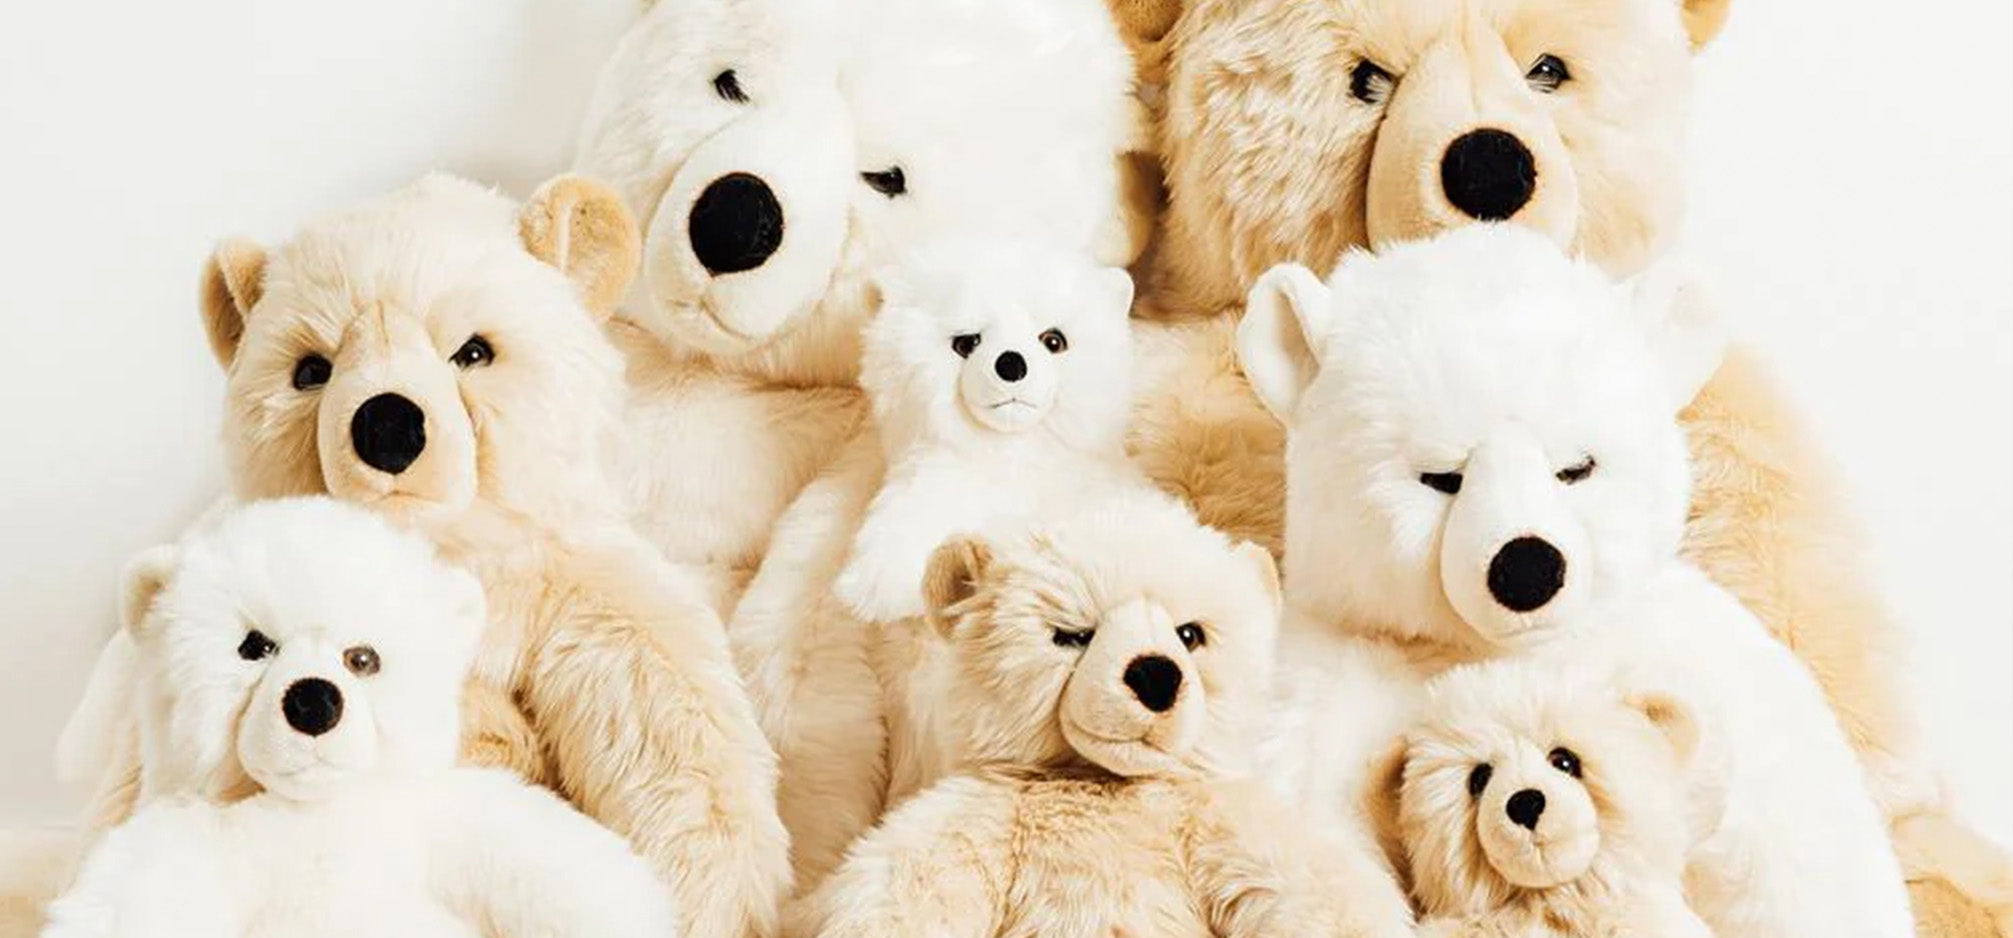 A large group of soft teddy bears with a white background